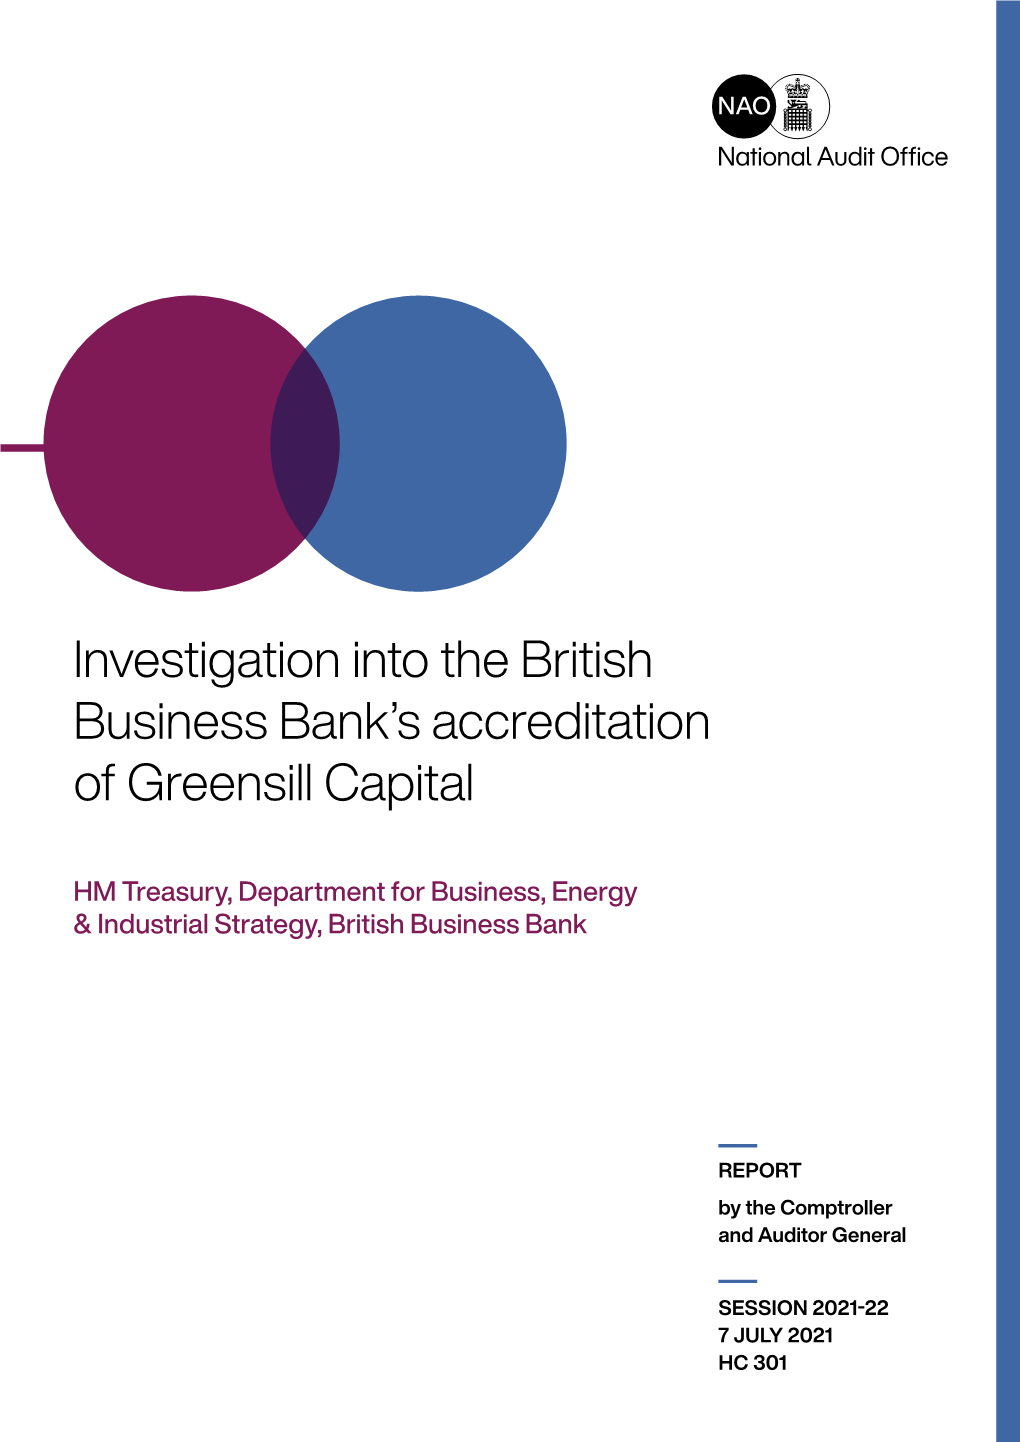 Investigation Into the British Business Bank's Accreditation of Greensill